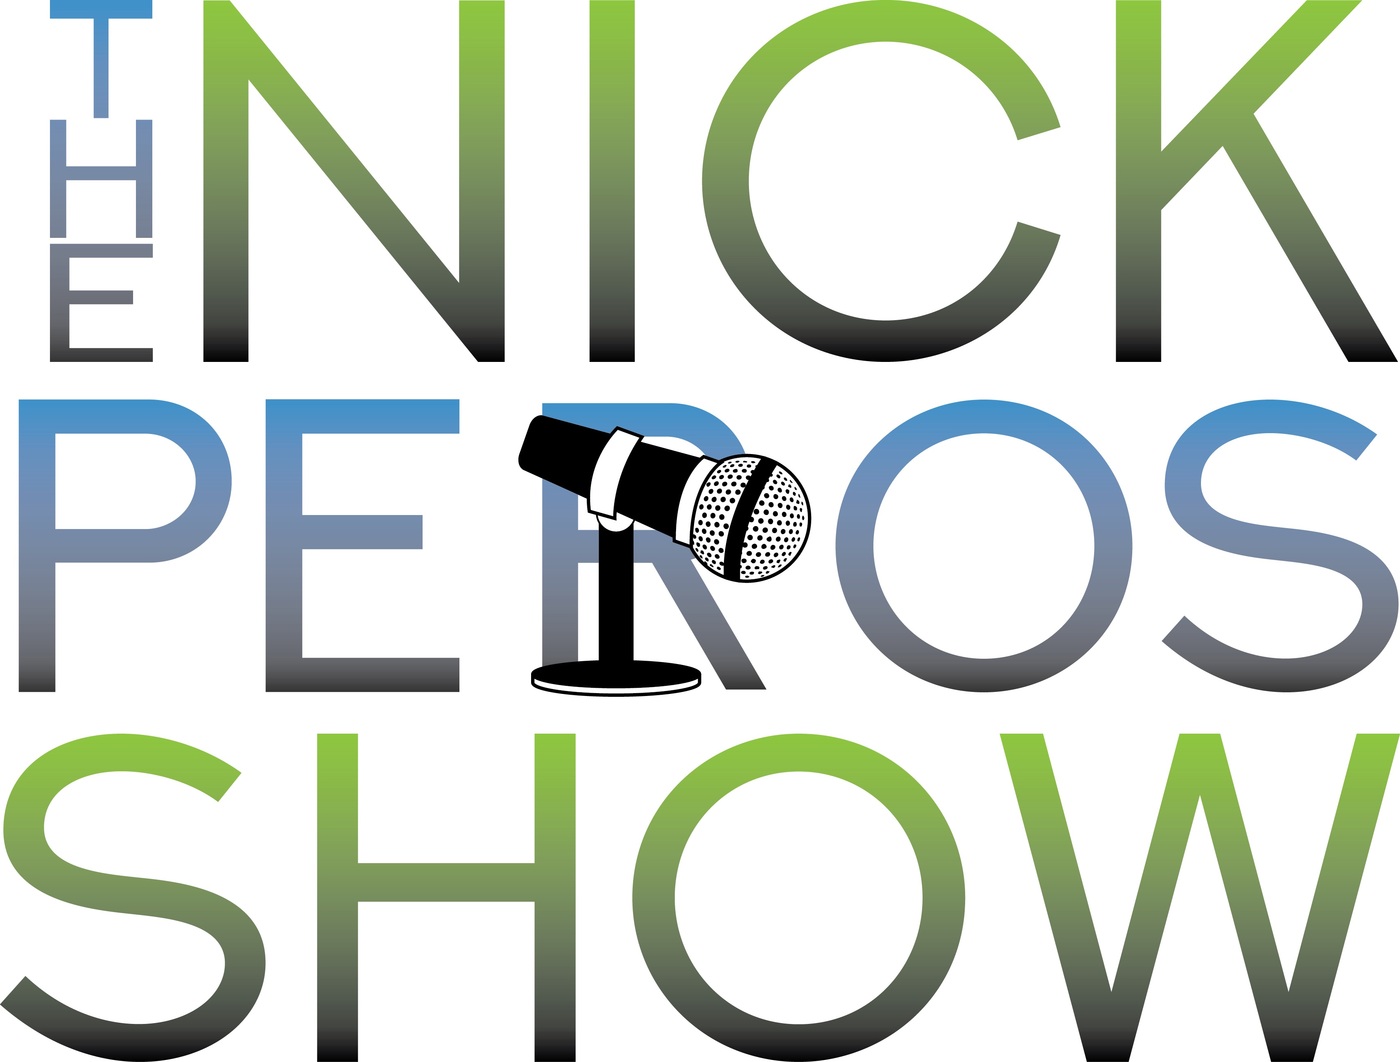 The Nick Peros Show - Episode 32 - Getting To Know Producer Nick